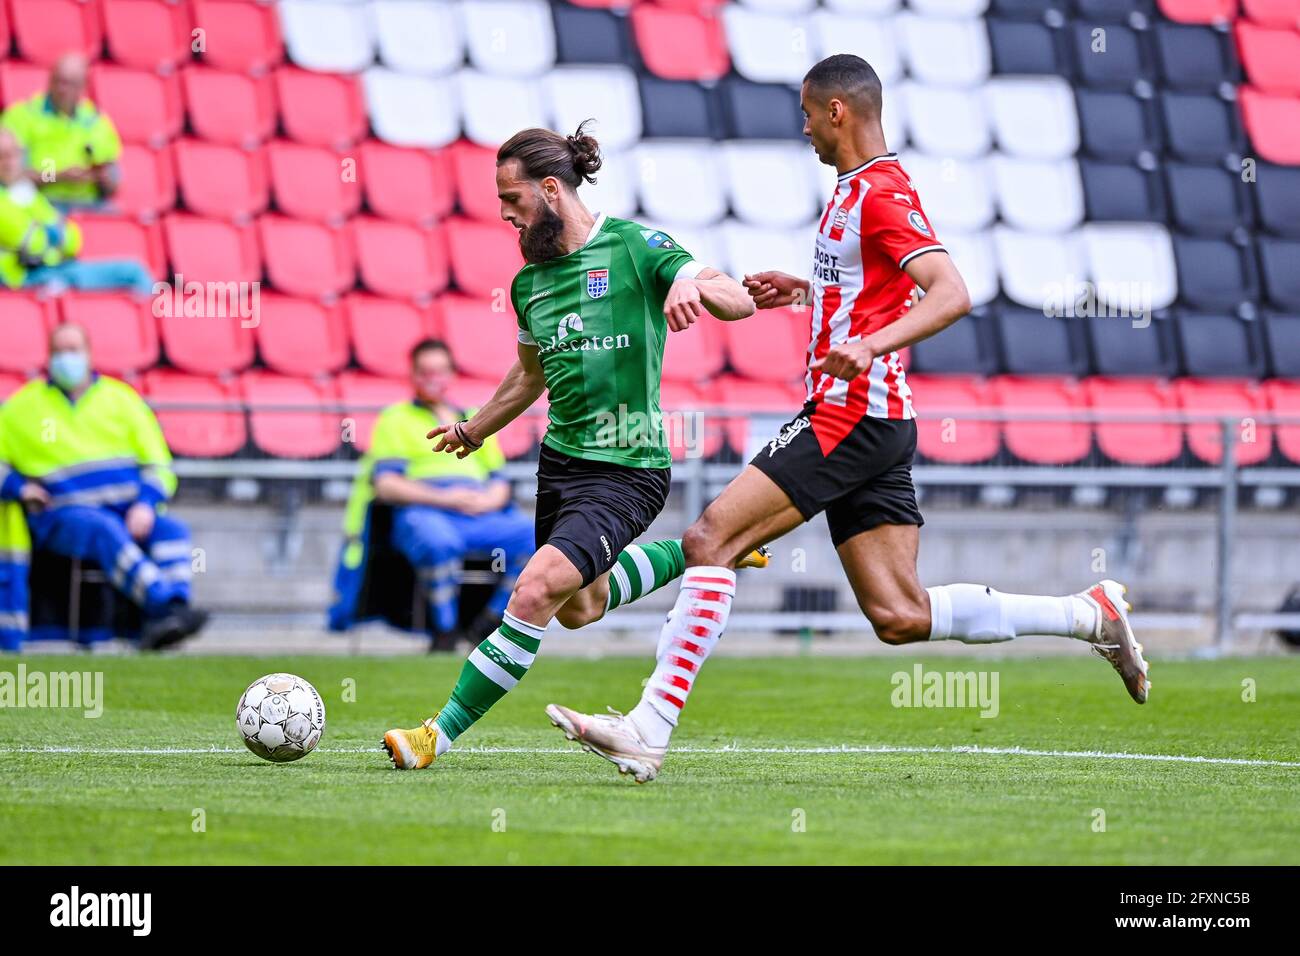 EINDHOVEN, NETHERLANDS - MAY 13: Destan Bajselmani of PEC Zwolle Cody Gakpo of PSV Eindhoven during the Dutch Eredivisie match between PSV and PEC Zwo Stock Photo